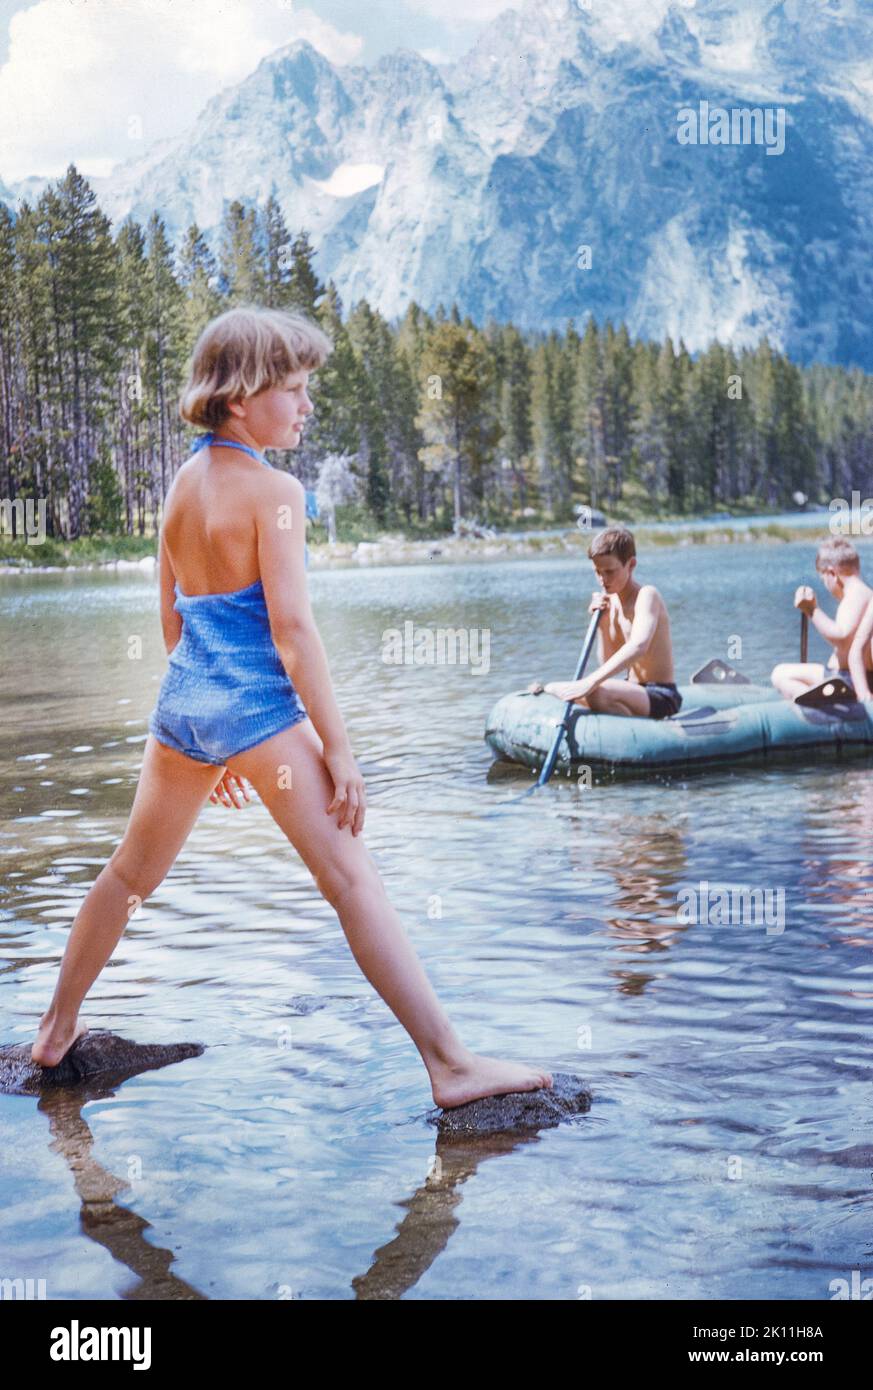 Two Boys in inflatable Raft, Girl standing on two Rocks in Water, Trail Creek Ranch, Wilson, Wyoming, USA, Toni Frissell Collection, August 1958 Stock Photo